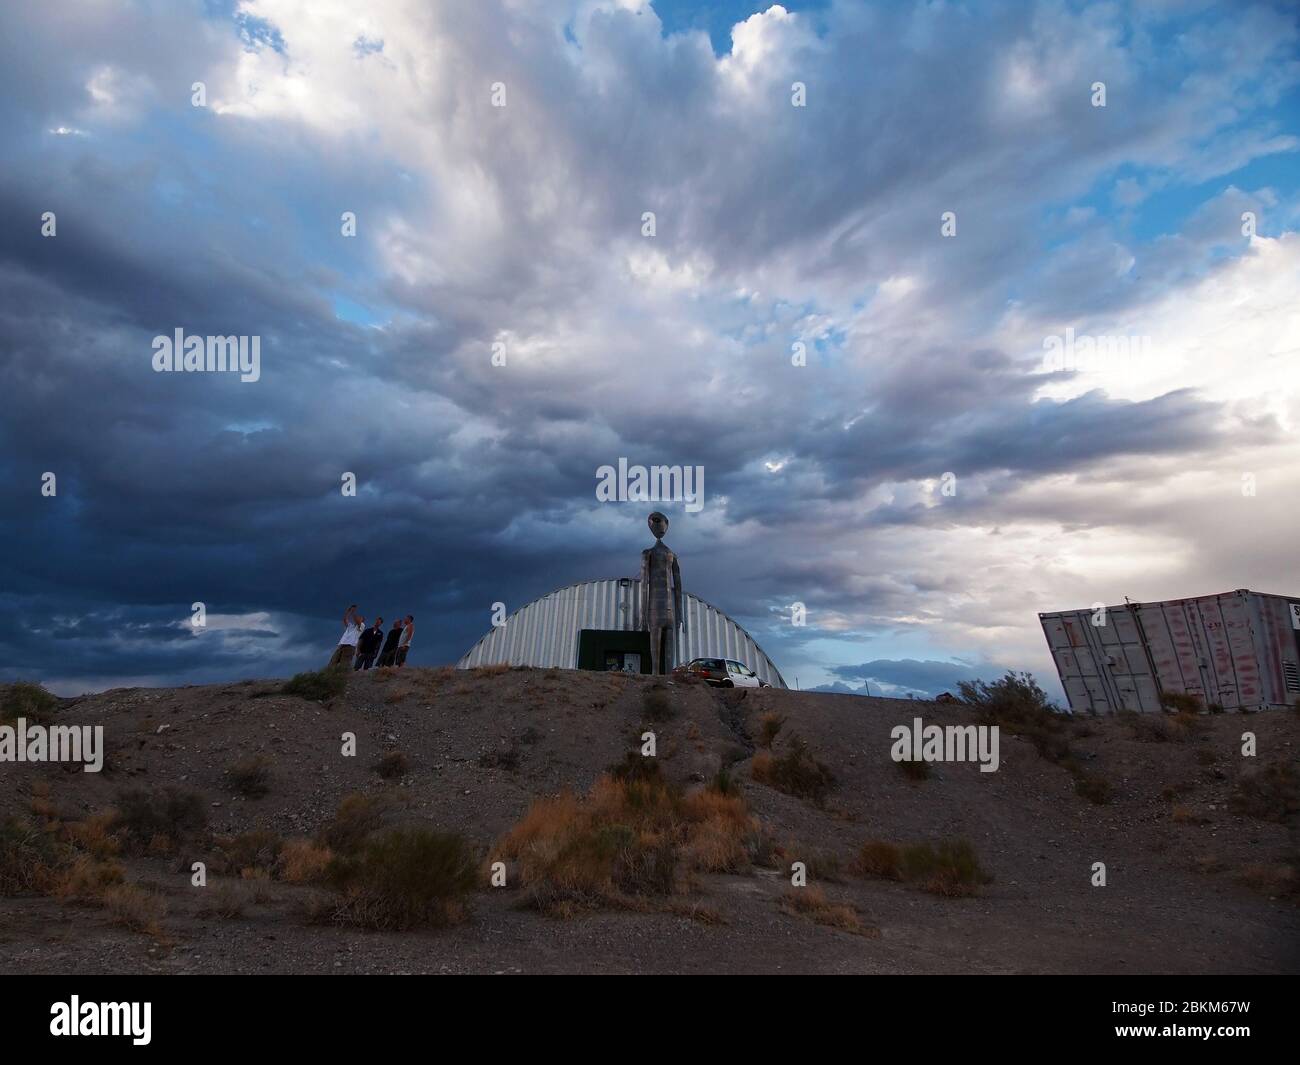 HIKO, NEVADA - JULY 22, 2018: Four men take a selfie together on a cell phone outside the Alien Research Center, an alien themed gift shop, in the Nev Stock Photo